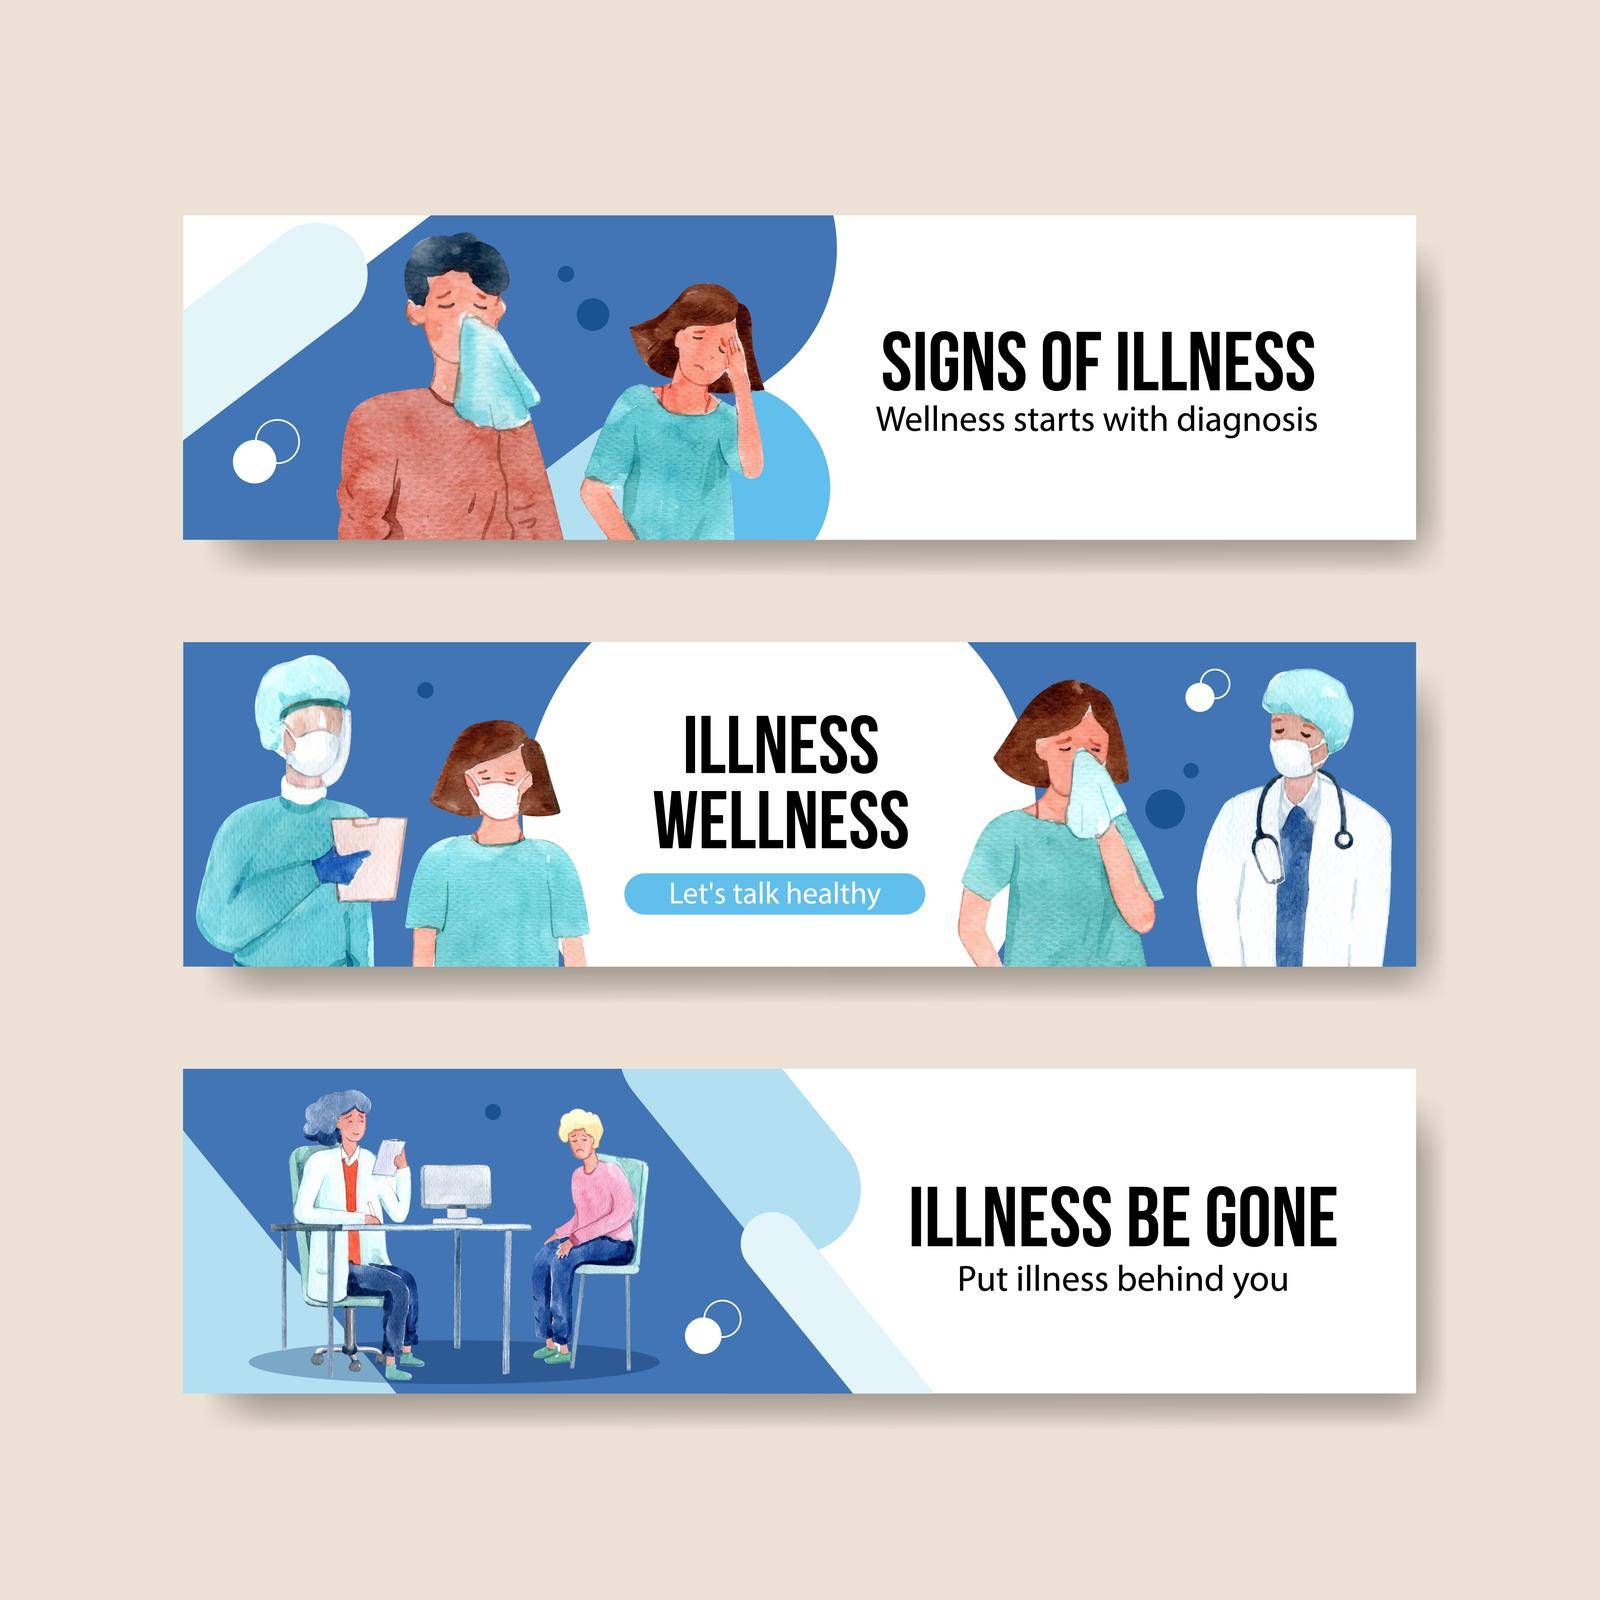 Illnesses banner design concept with people and doctor characters with infographic symptomatic watercolor vector illustration by Photographeeasia